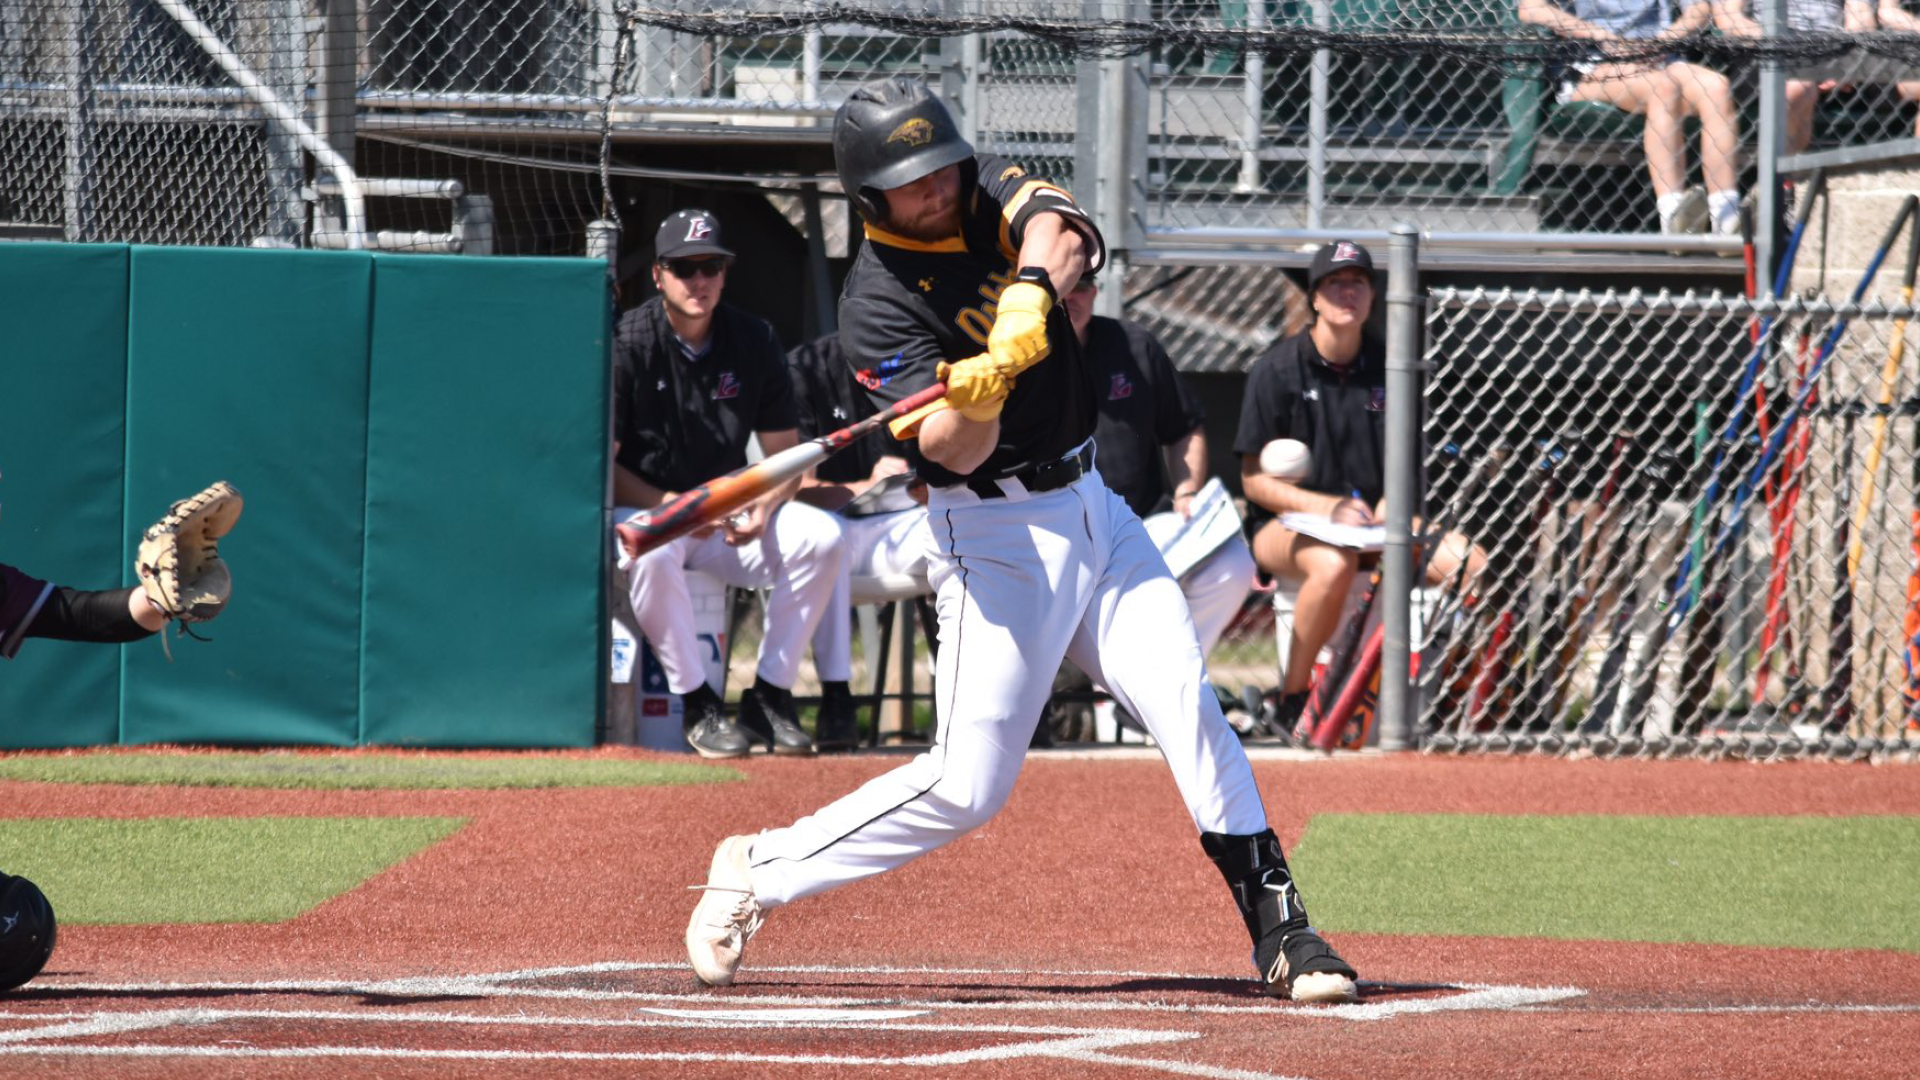 Zach Taylor went 9-for-11 with five runs, five RBIs, two doubles and two home runs against the Eagles on Sunday. Photo Credit: Jennifer Zuberbier, UW-Oshkosh Athletics